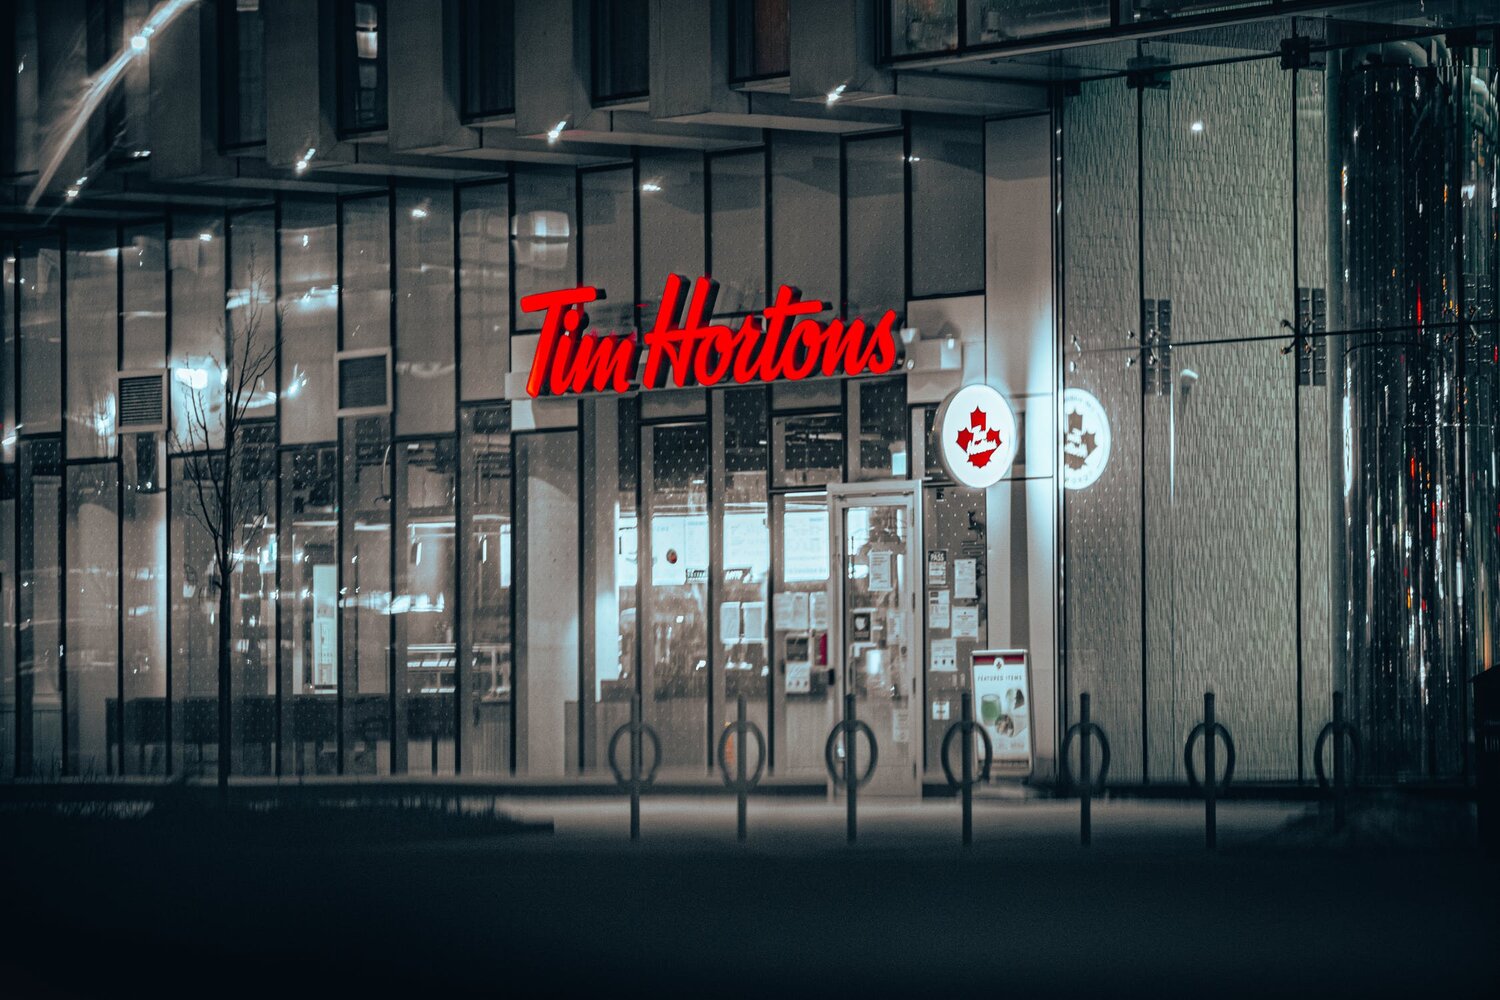 Business Analysis Report on Tim Hortons: Company History